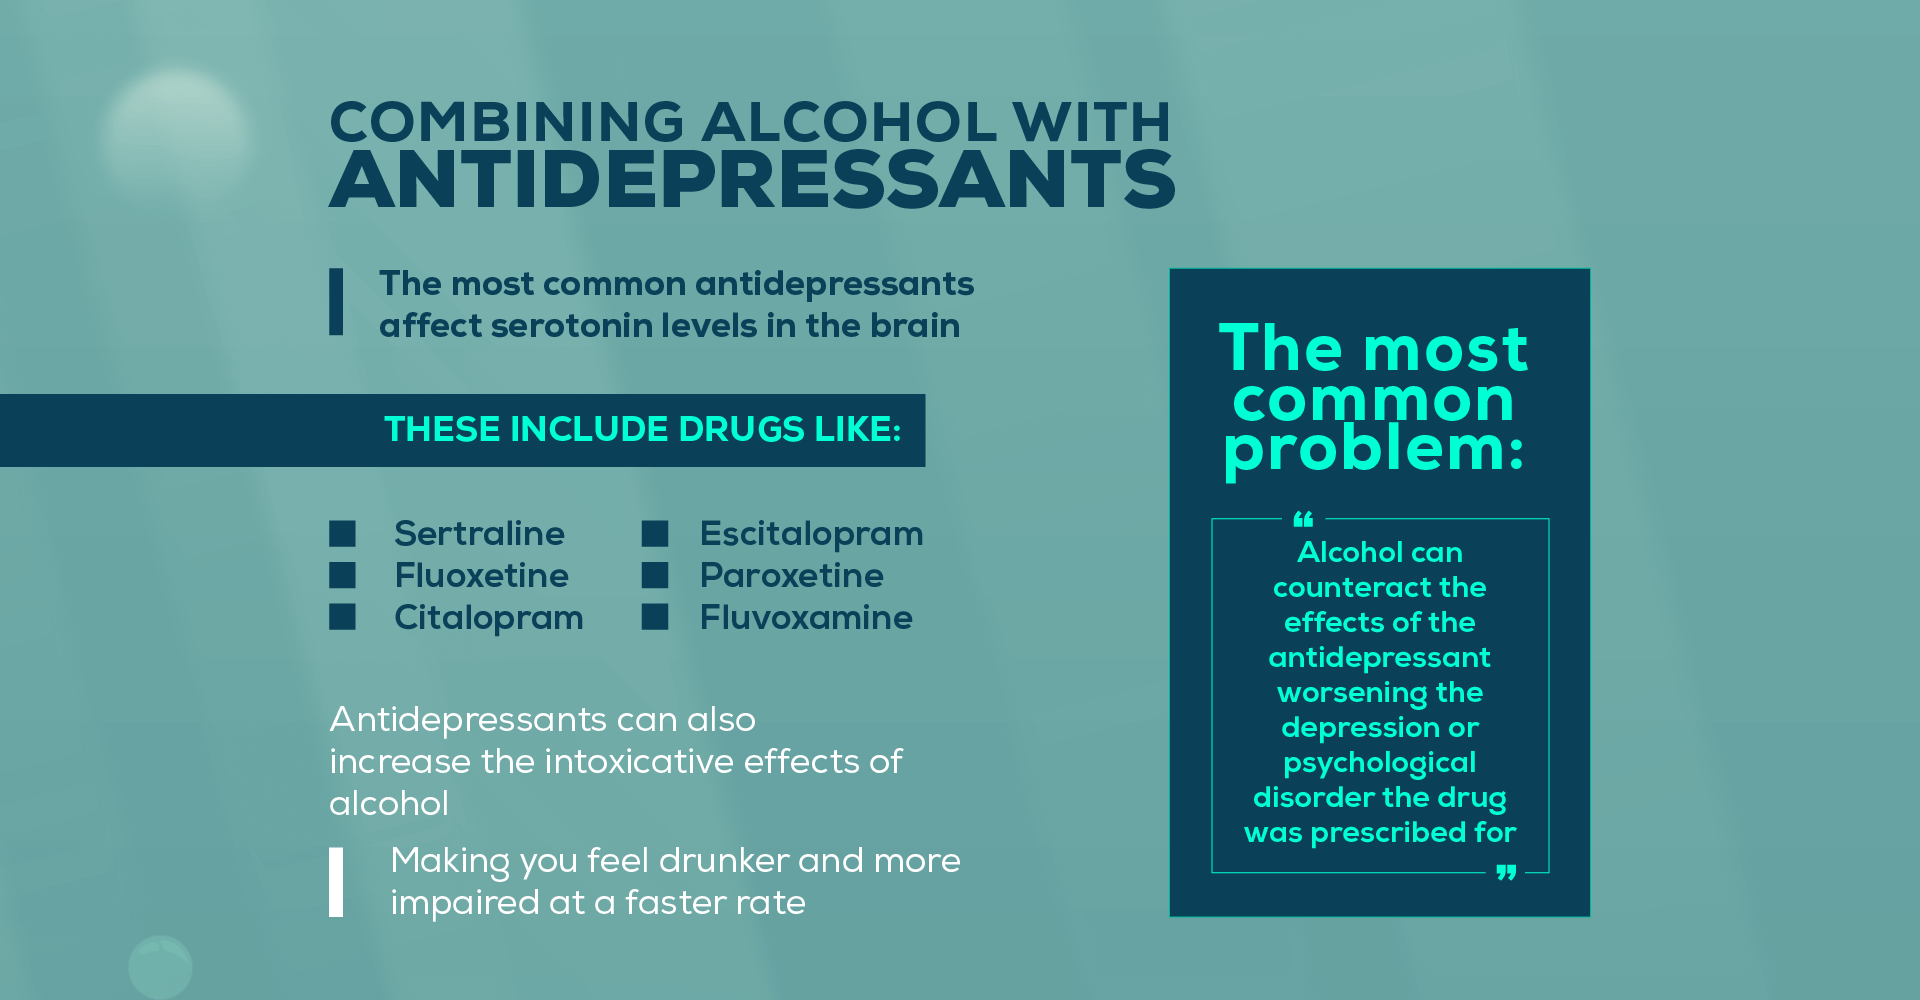 Combining Alcohol with Antidepressants